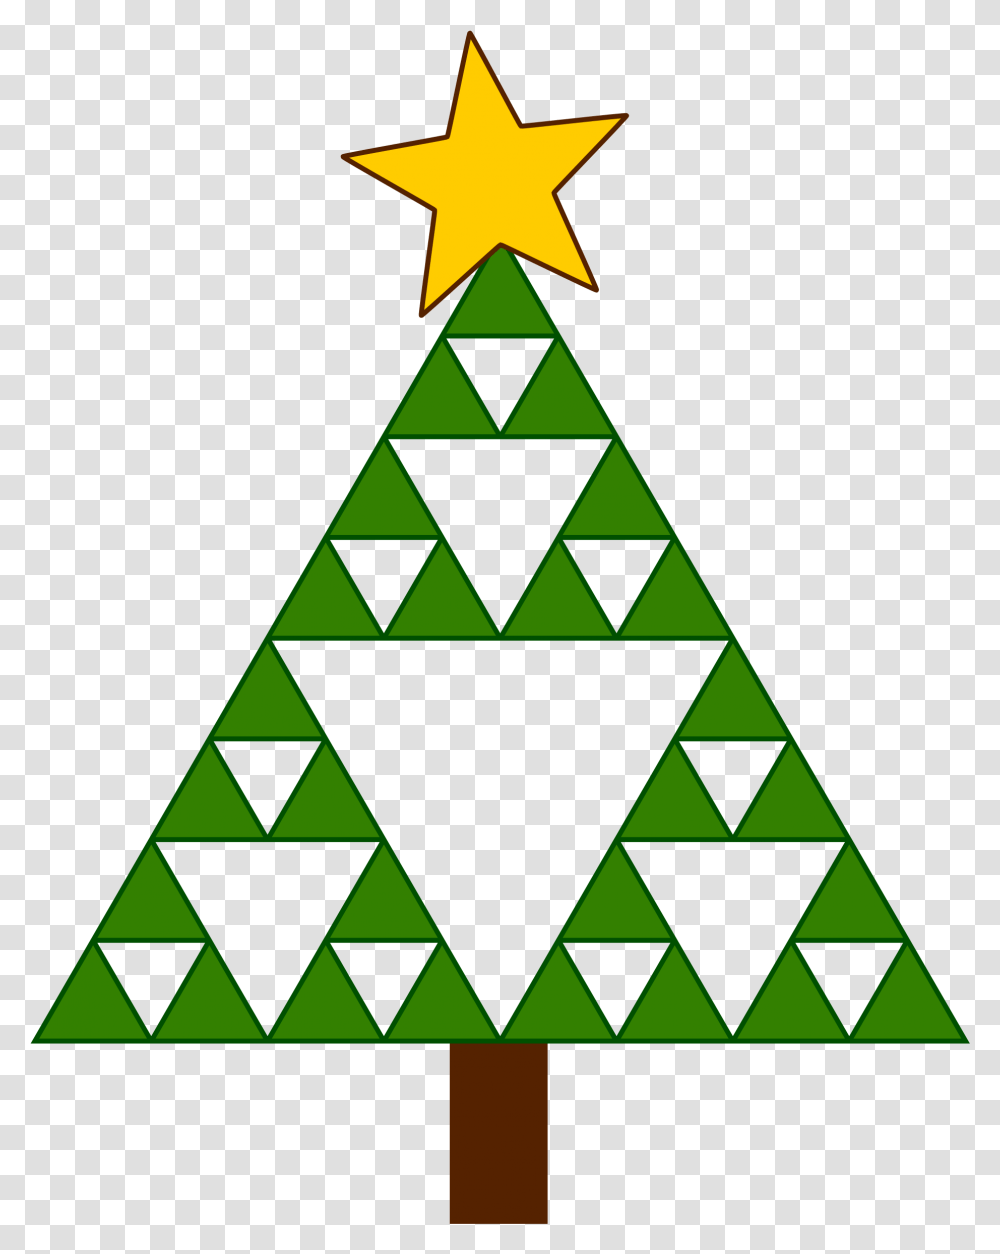 Triangle Clip Christmas Tree Clipart Freeuse Stock Sierpinski Triangle Christmas Tree, Star Symbol Transparent Png